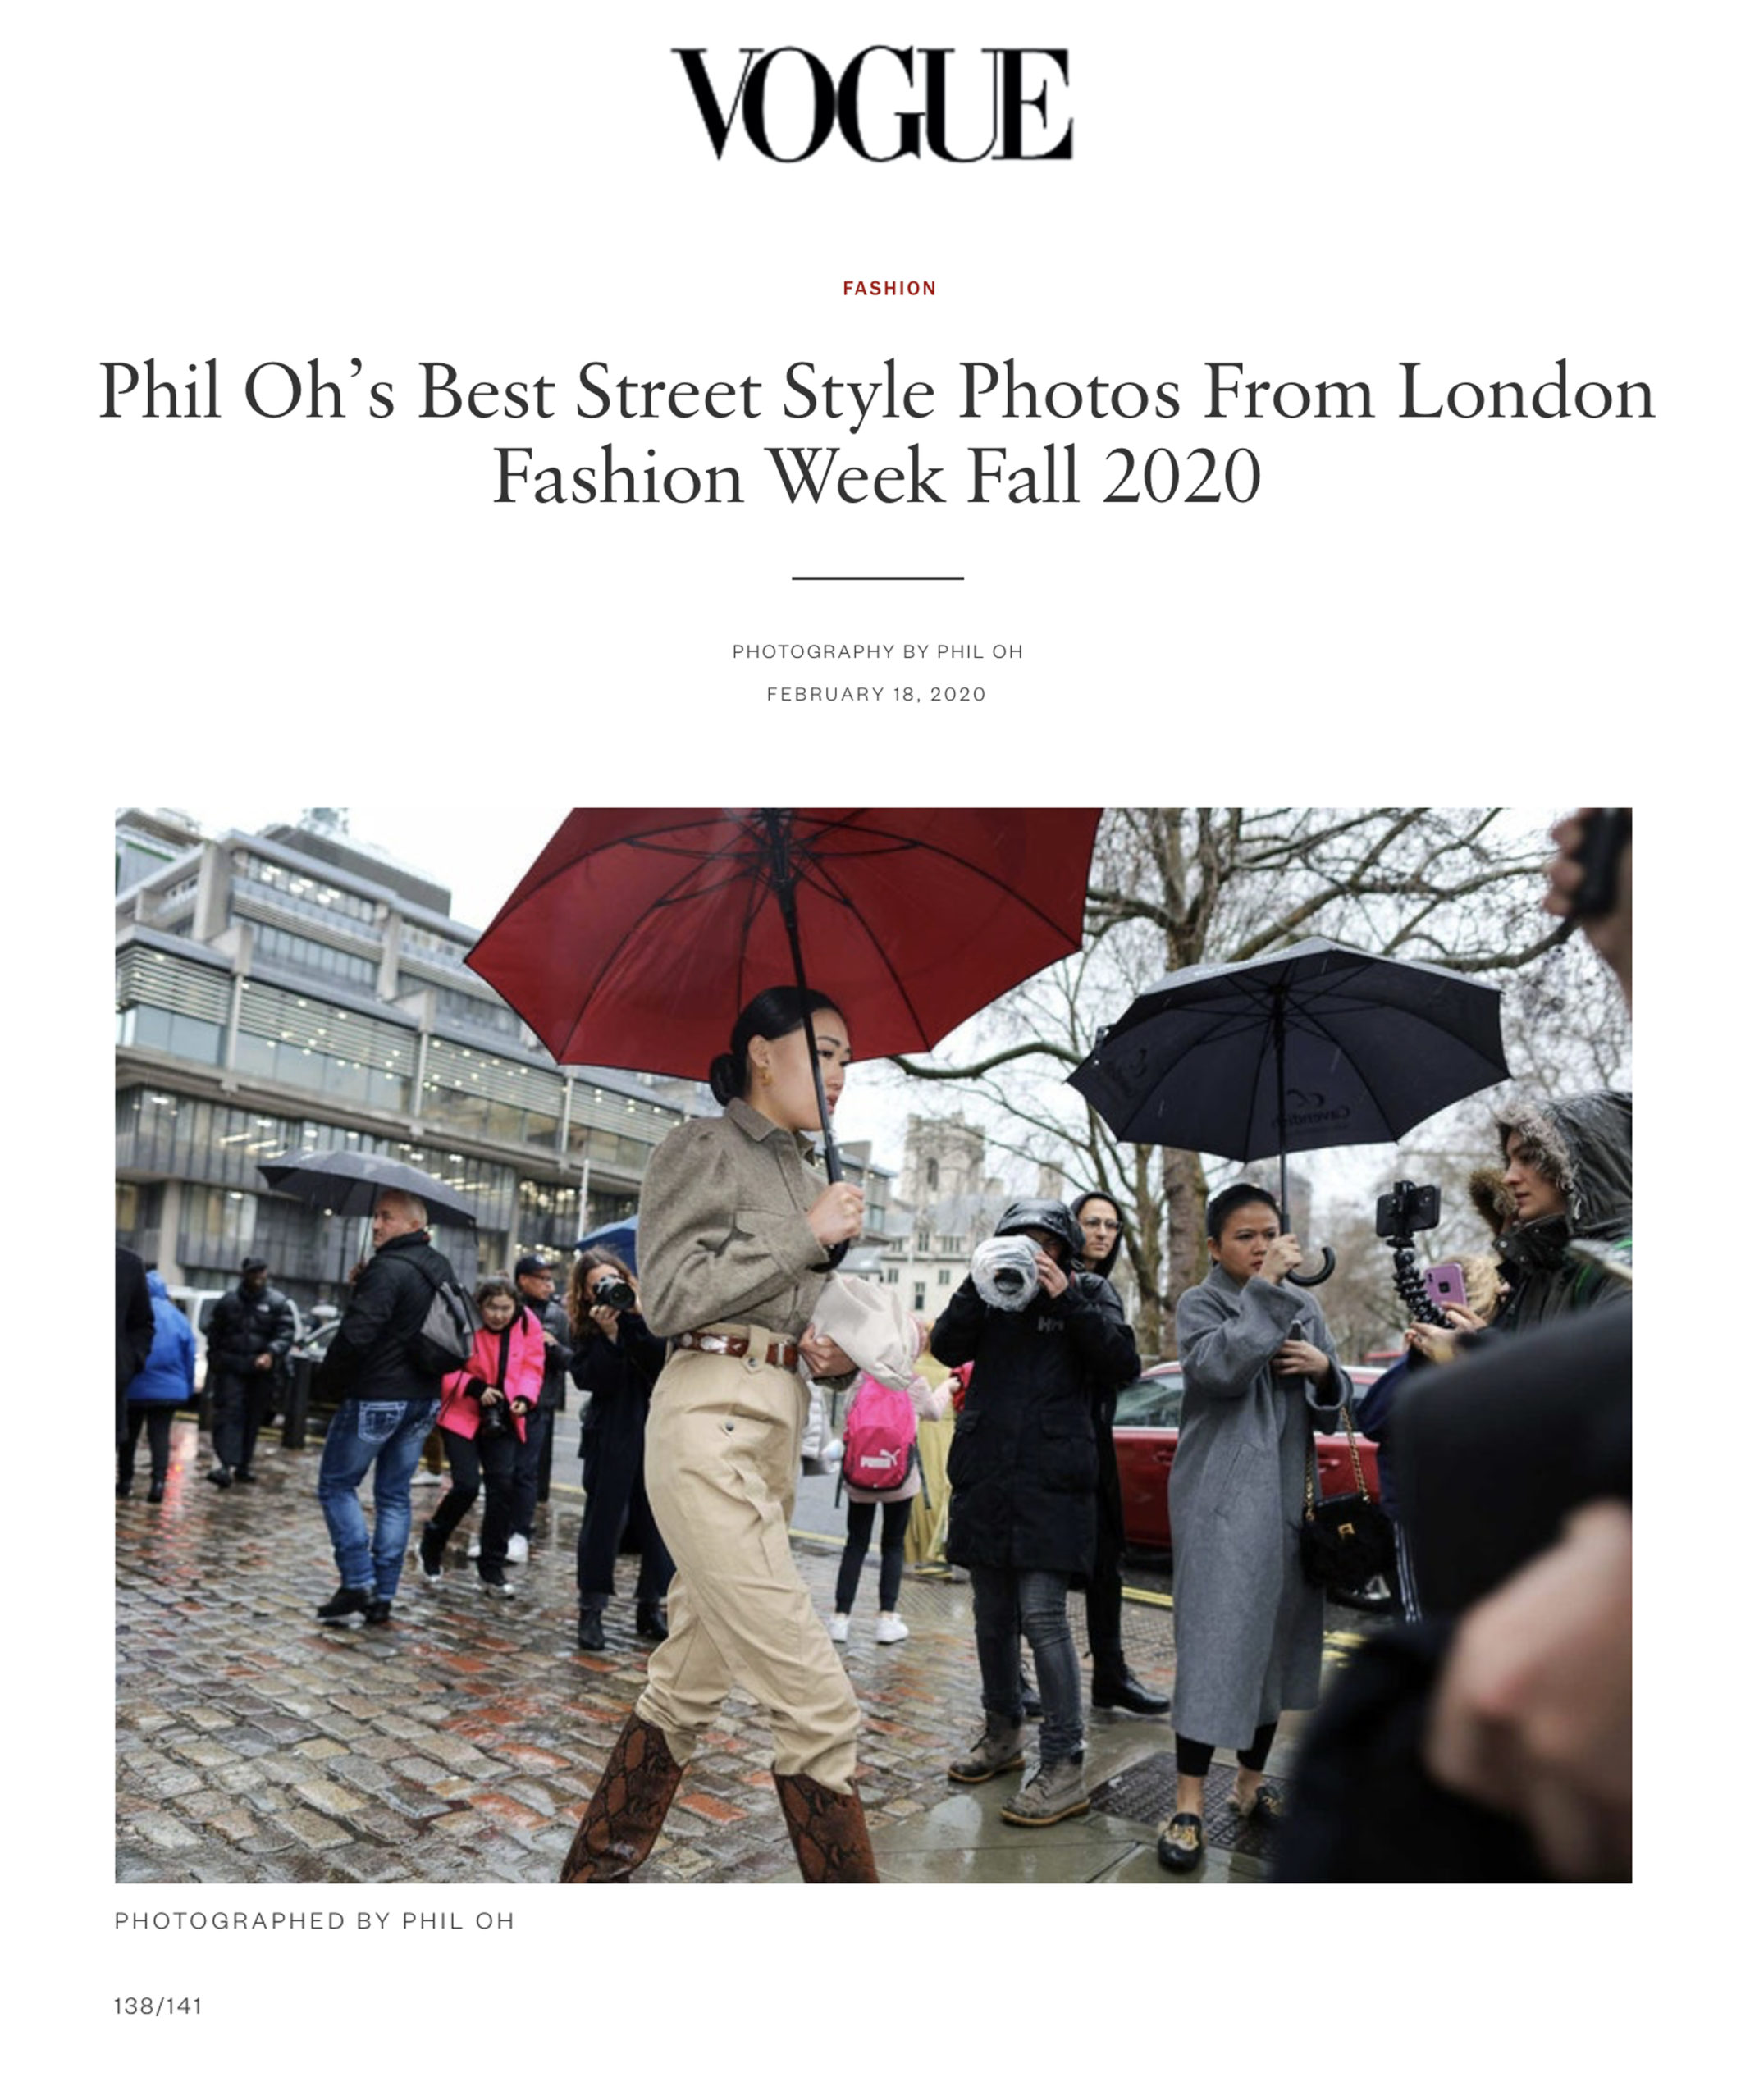 Vogue: Phil Oh’s Best Street Style Photos From London Fashion Week